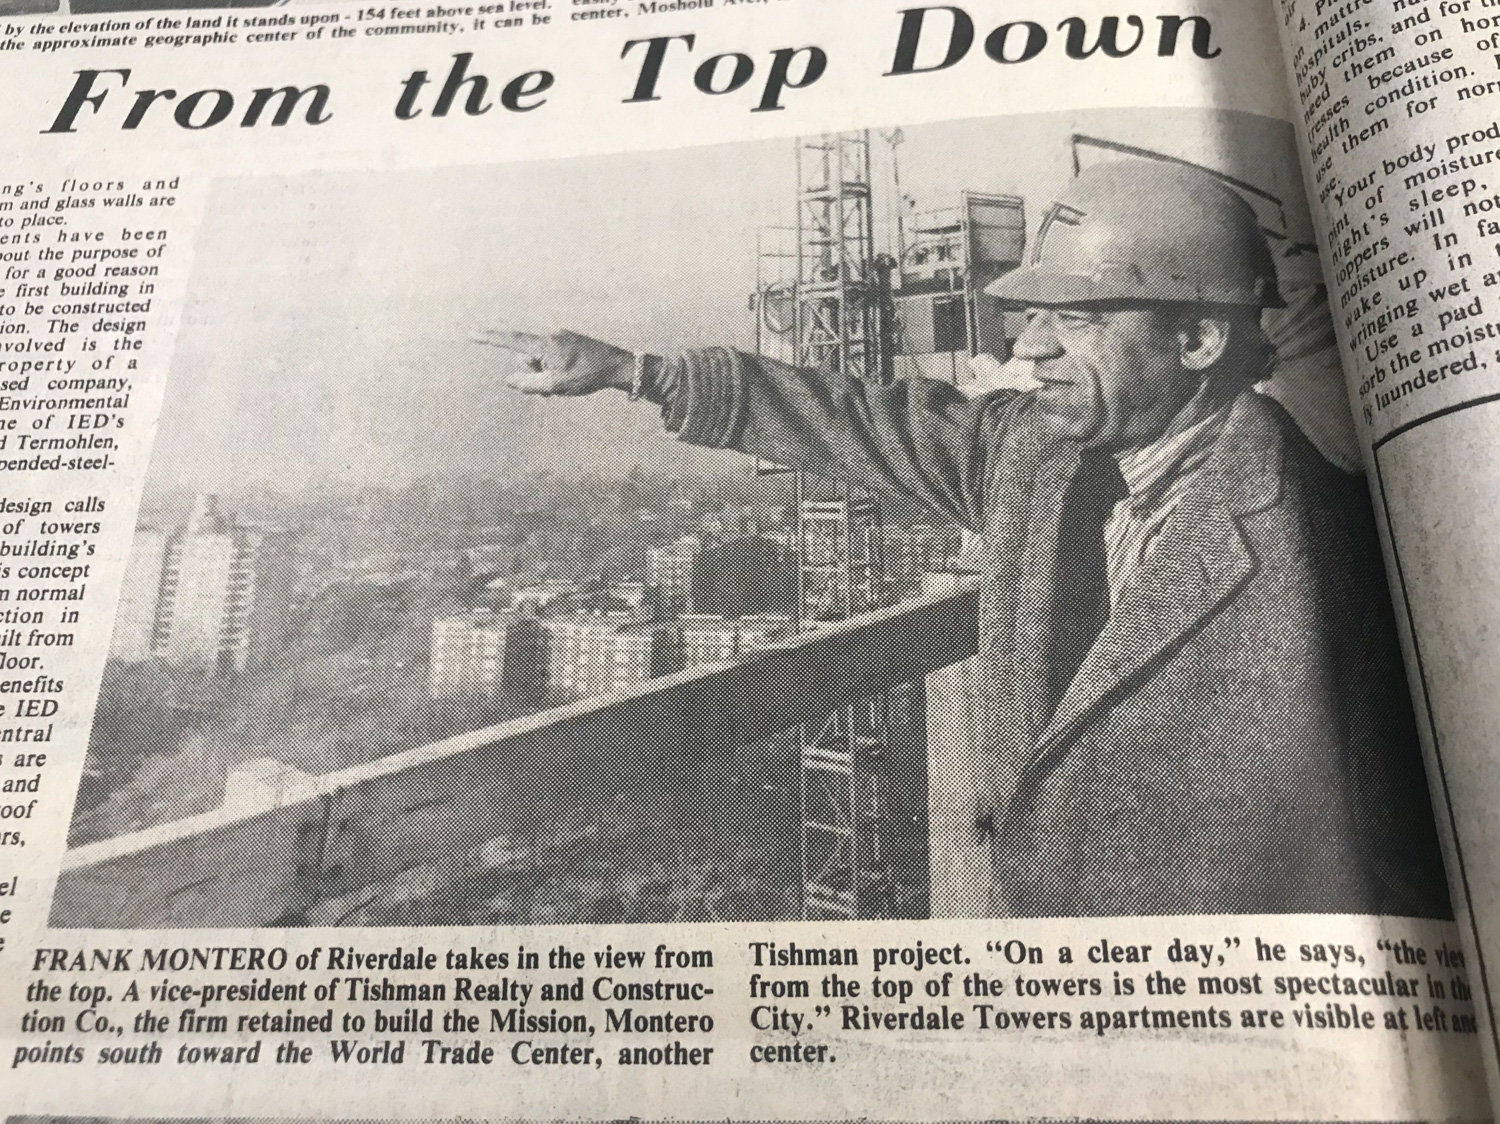 Frank Montero, a vice president with Tishman Realty and Construction Co., points from the barren towers of the Russian Mission in North Riverdale to another one of his company’s projects, the World Trade Center towers 15 miles south in Manhattan. He was joined on this particular trip to the Mosholu Avenue construction site by Riverdale Press features reporter Sol Solomon.